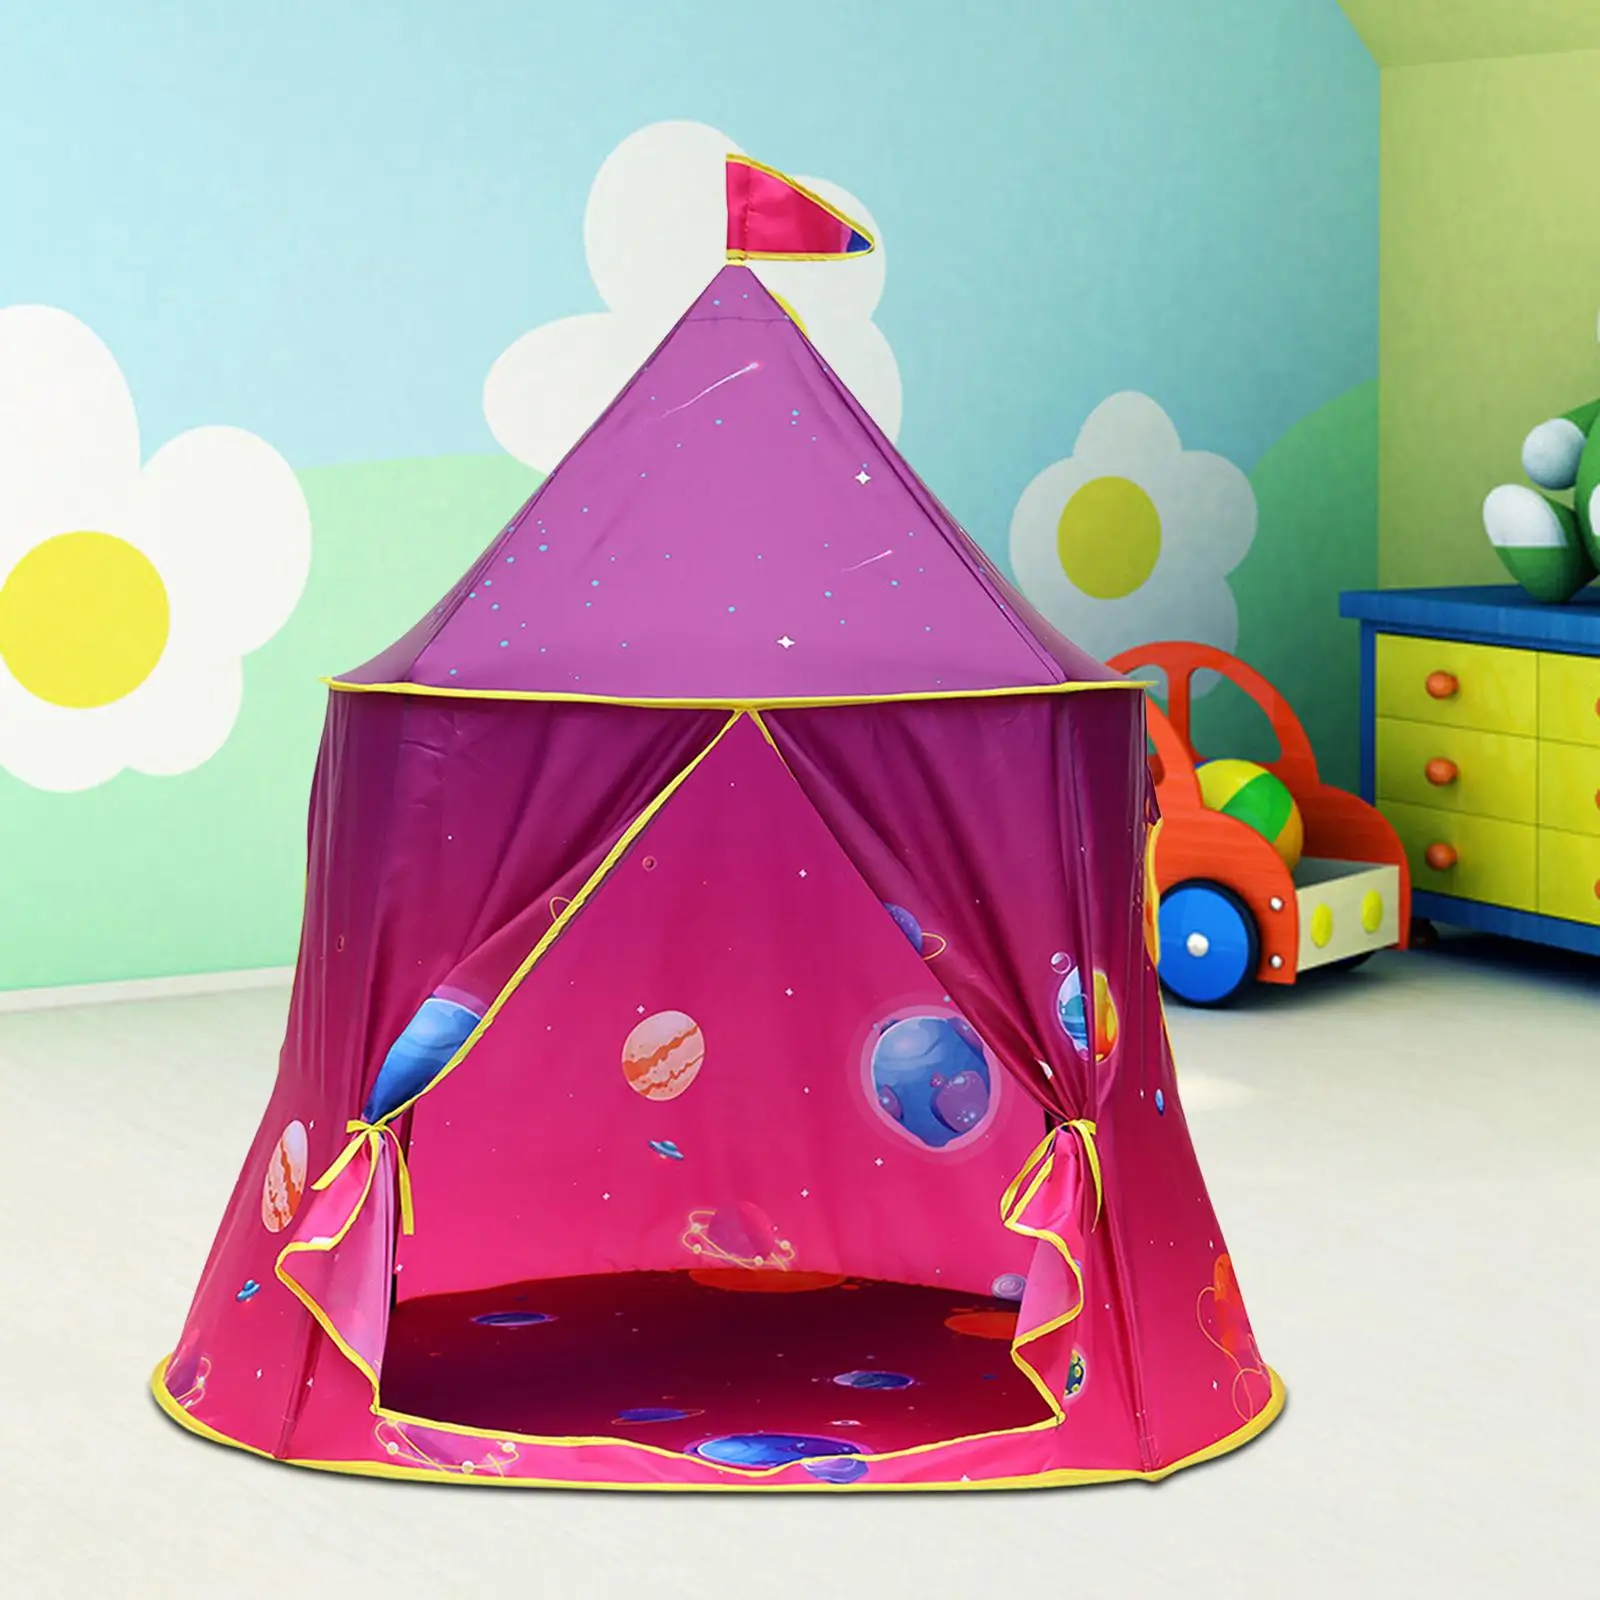 Children Play Tent Playhouse Tent Easy Assemble Portable Pretend Play Tent for Outdoor